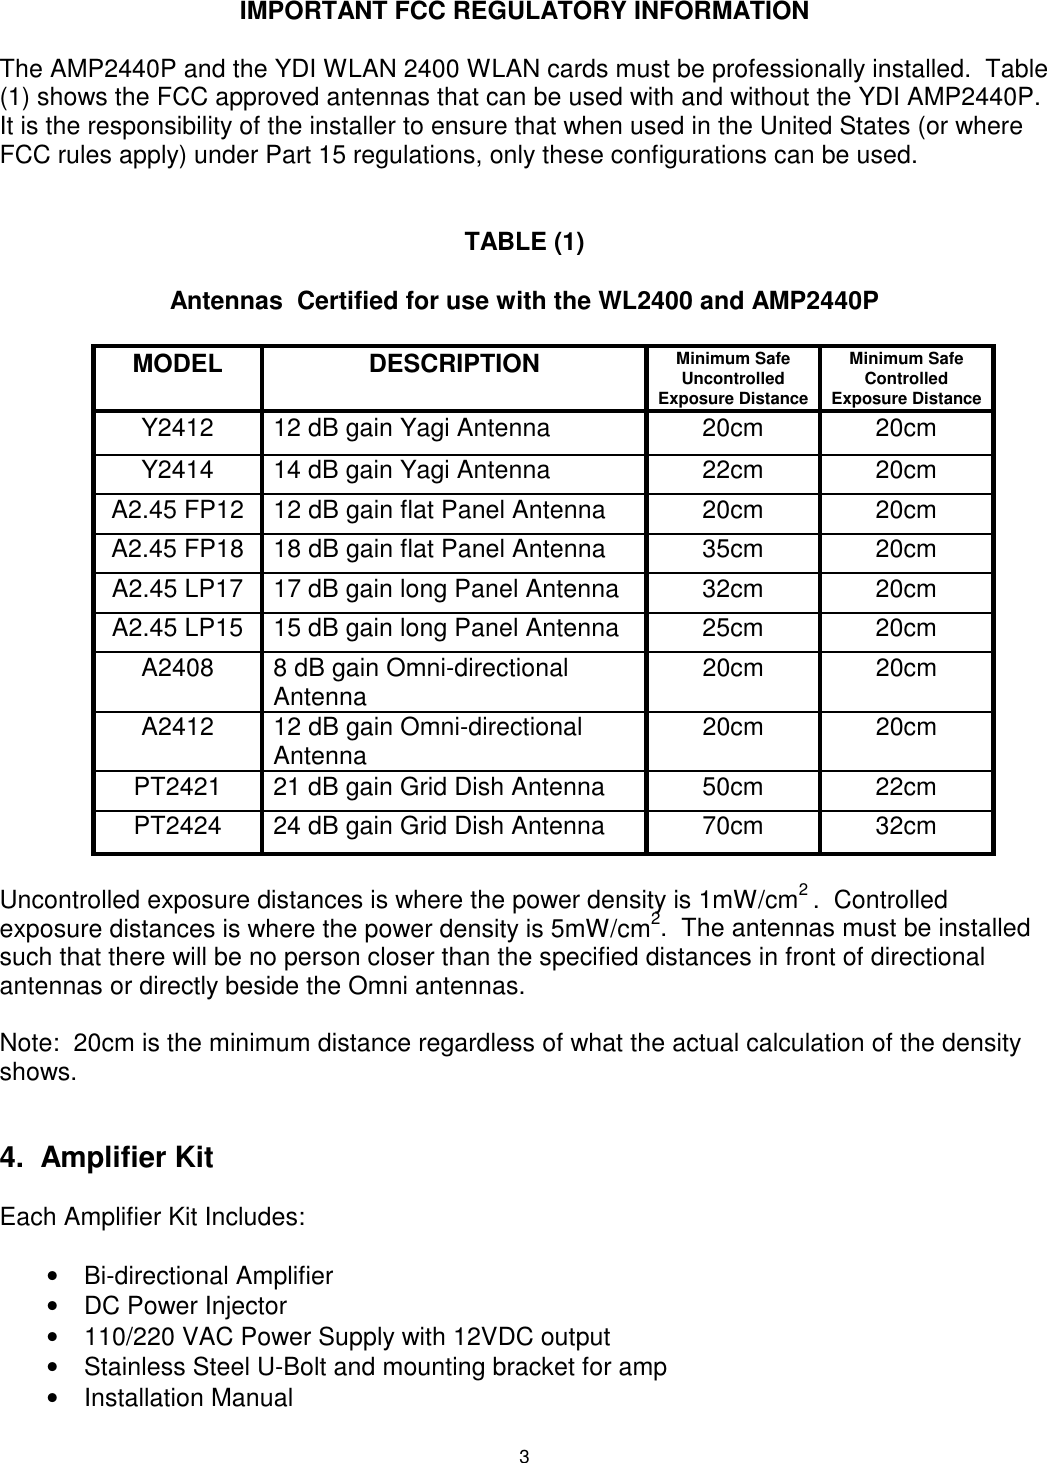 3IMPORTANT FCC REGULATORY INFORMATIONThe AMP2440P and the YDI WLAN 2400 WLAN cards must be professionally installed.  Table(1) shows the FCC approved antennas that can be used with and without the YDI AMP2440P.It is the responsibility of the installer to ensure that when used in the United States (or whereFCC rules apply) under Part 15 regulations, only these configurations can be used.TABLE (1)Antennas  Certified for use with the WL2400 and AMP2440PMODEL DESCRIPTION Minimum SafeUncontrolledExposure DistanceMinimum SafeControlledExposure DistanceY2412 12 dB gain Yagi Antenna 20cm 20cmY2414 14 dB gain Yagi Antenna 22cm 20cmA2.45 FP12 12 dB gain flat Panel Antenna 20cm 20cmA2.45 FP18 18 dB gain flat Panel Antenna 35cm 20cmA2.45 LP17 17 dB gain long Panel Antenna 32cm 20cmA2.45 LP15 15 dB gain long Panel Antenna 25cm 20cmA2408 8 dB gain Omni-directionalAntenna 20cm 20cmA2412 12 dB gain Omni-directionalAntenna 20cm 20cmPT2421 21 dB gain Grid Dish Antenna 50cm 22cmPT2424 24 dB gain Grid Dish Antenna 70cm 32cmUncontrolled exposure distances is where the power density is 1mW/cm2 .  Controlledexposure distances is where the power density is 5mW/cm2.  The antennas must be installedsuch that there will be no person closer than the specified distances in front of directionalantennas or directly beside the Omni antennas.Note:  20cm is the minimum distance regardless of what the actual calculation of the densityshows.4. Amplifier KitEach Amplifier Kit Includes:• Bi-directional Amplifier•  DC Power Injector•  110/220 VAC Power Supply with 12VDC output•  Stainless Steel U-Bolt and mounting bracket for amp• Installation Manual